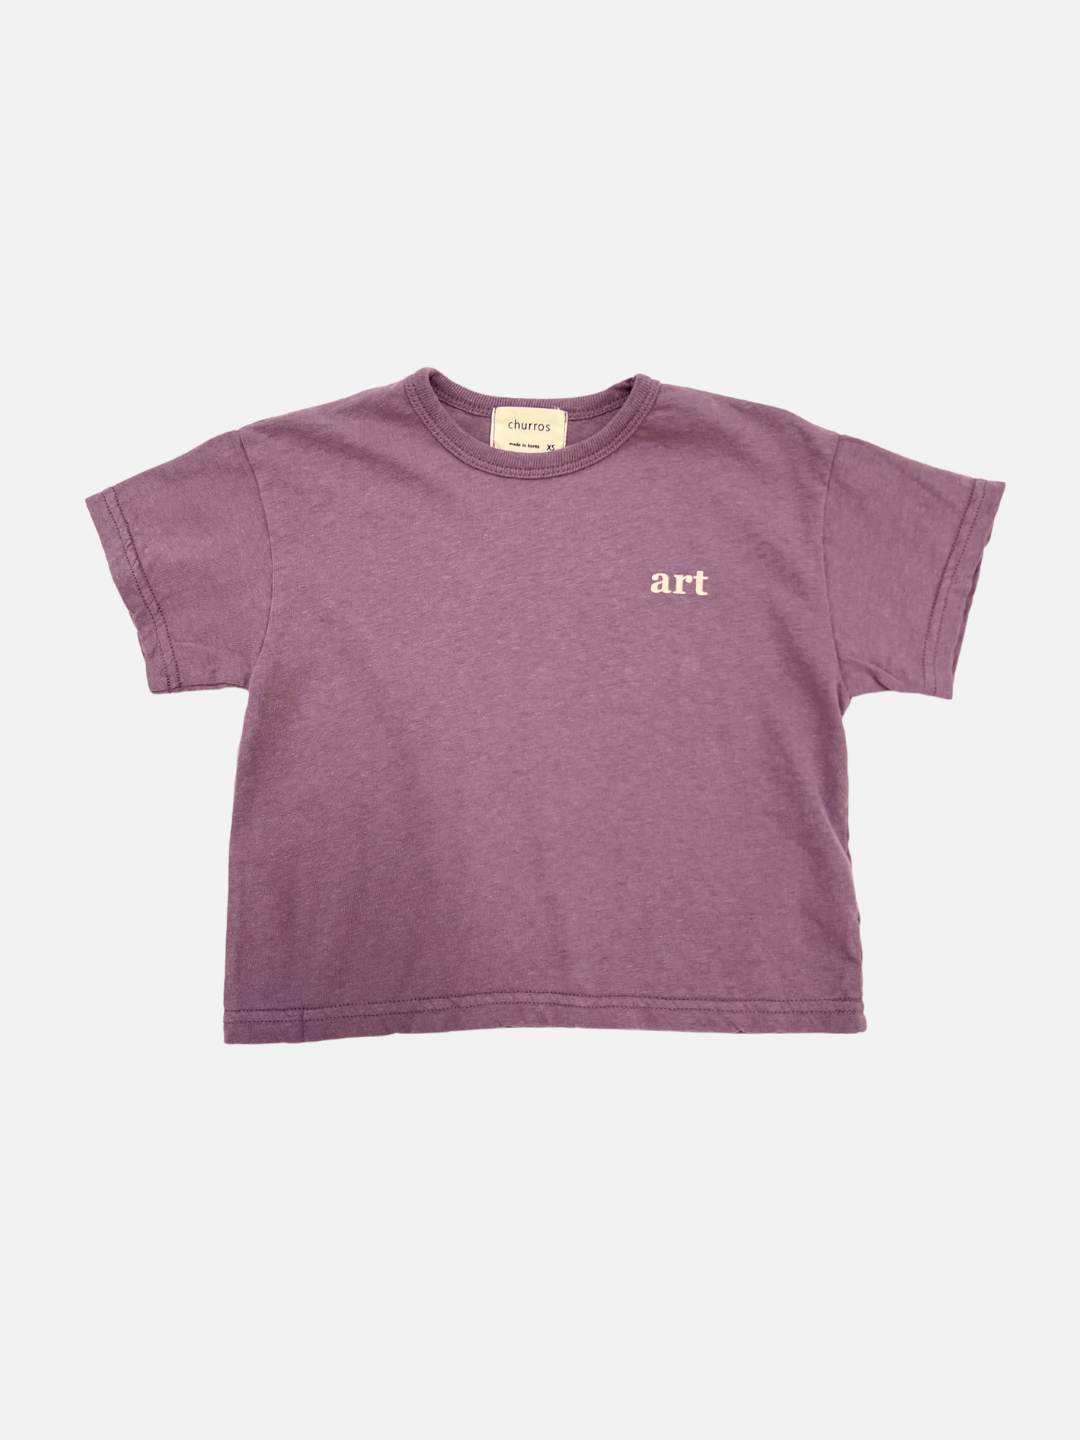 Mauve | Front view of the kid's Studio tee in mauve, with the words "art" printed on the right side